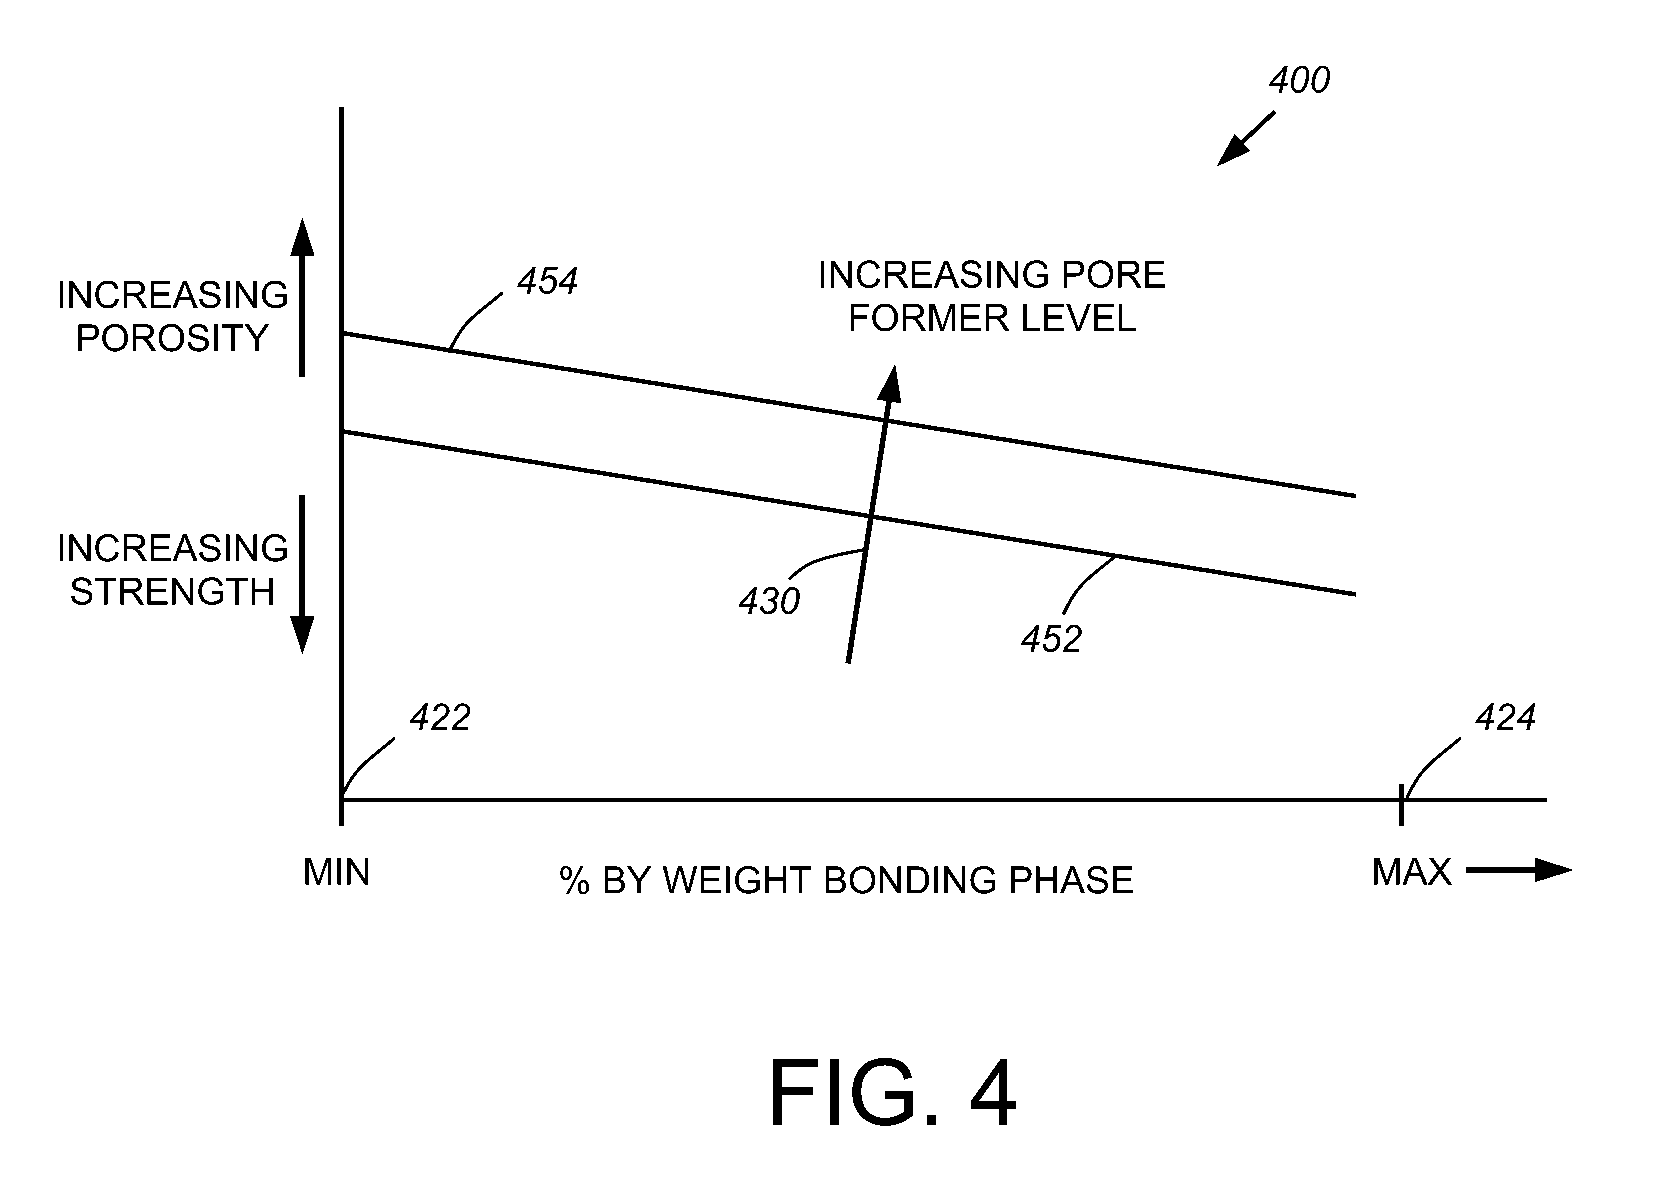 System and Method for Fabricating Ceramic Substrates